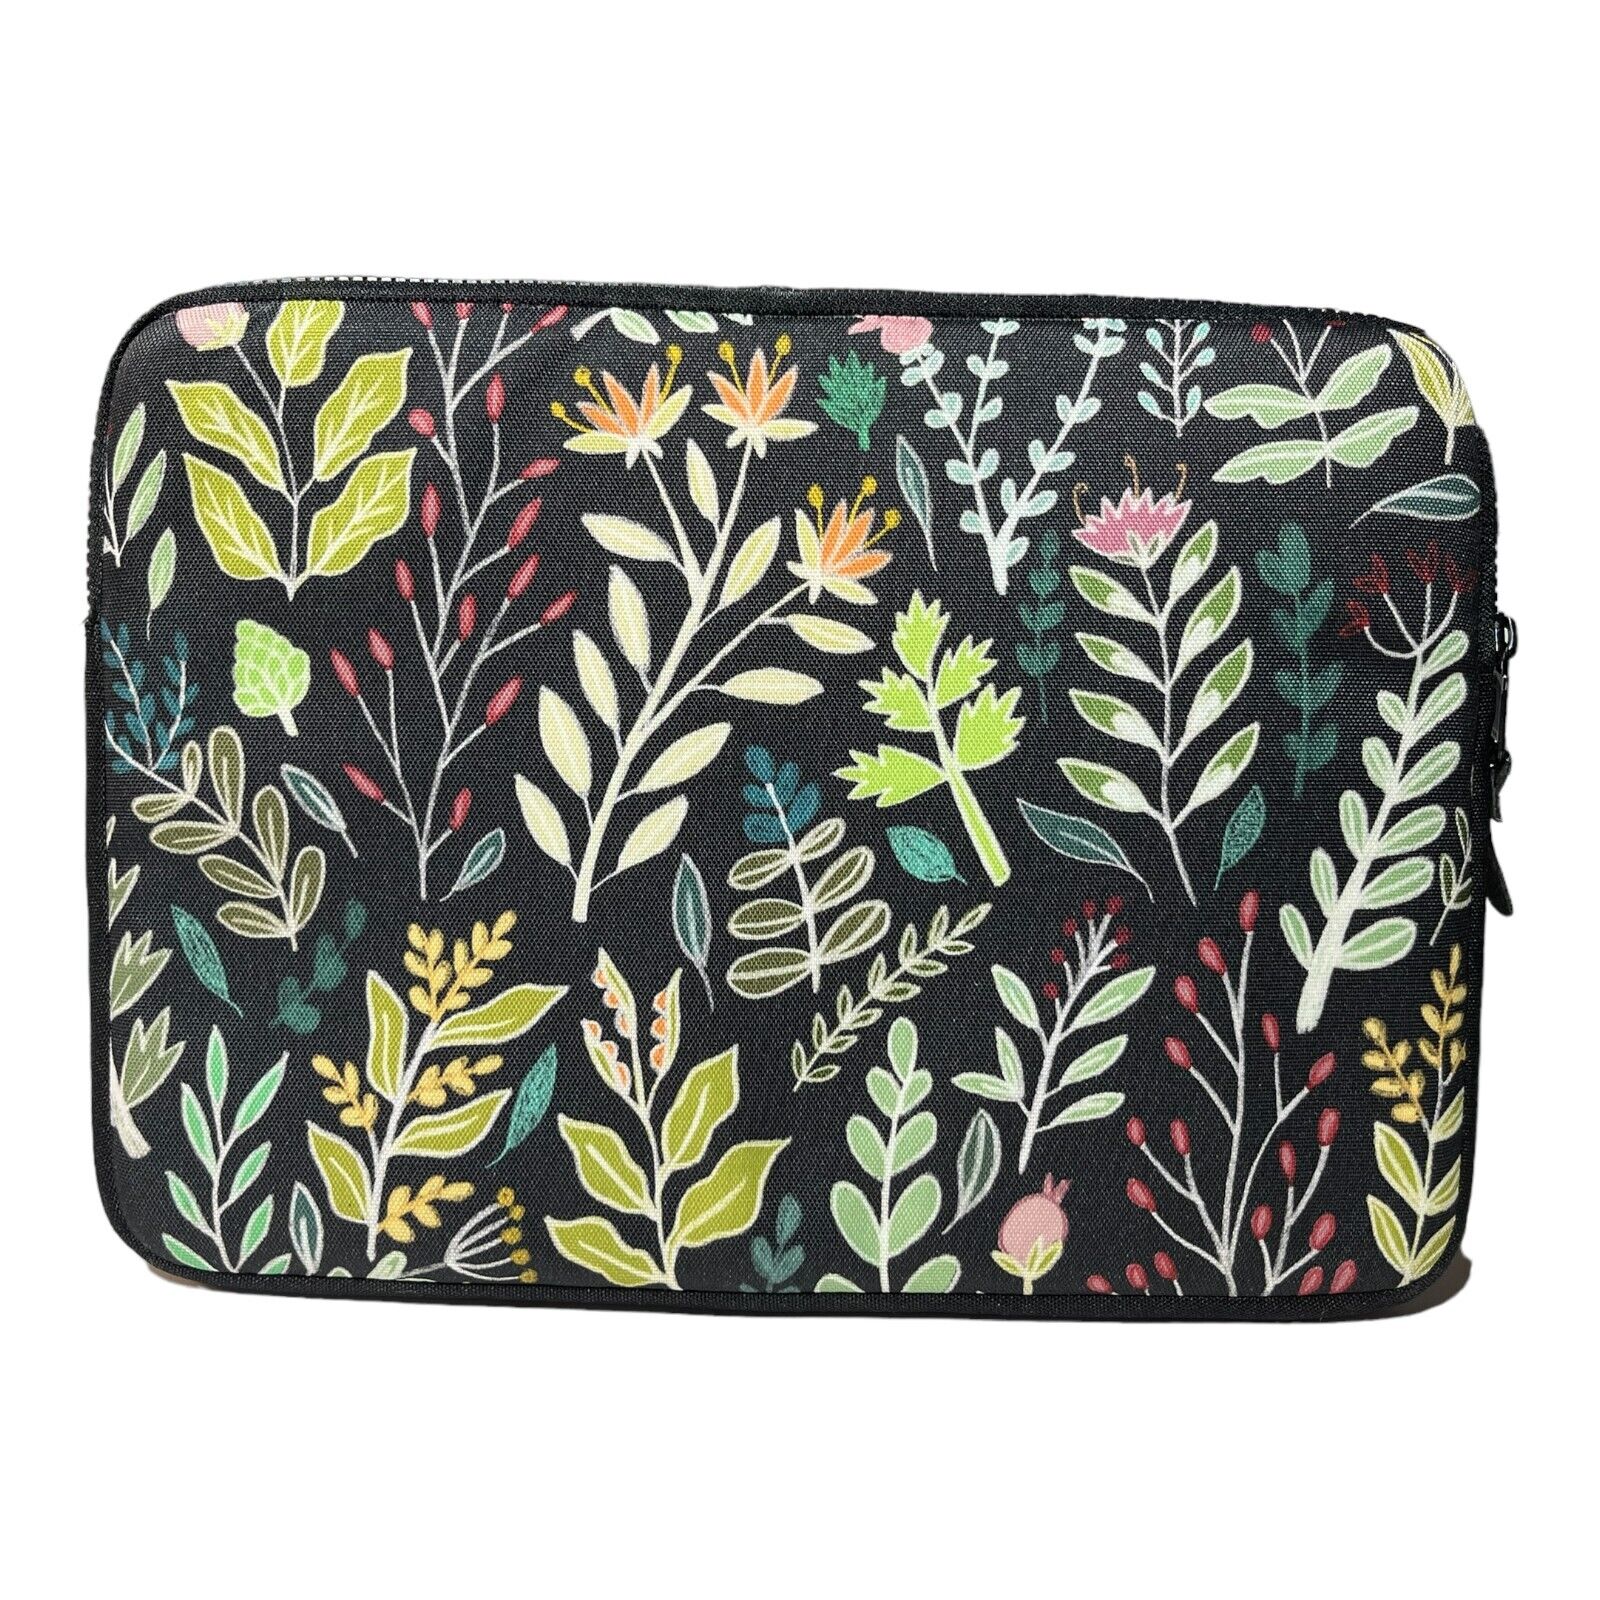 Society 6 Laptop Zipper Case Sleeve Padded Carrying Travel Case 10x14 Floral